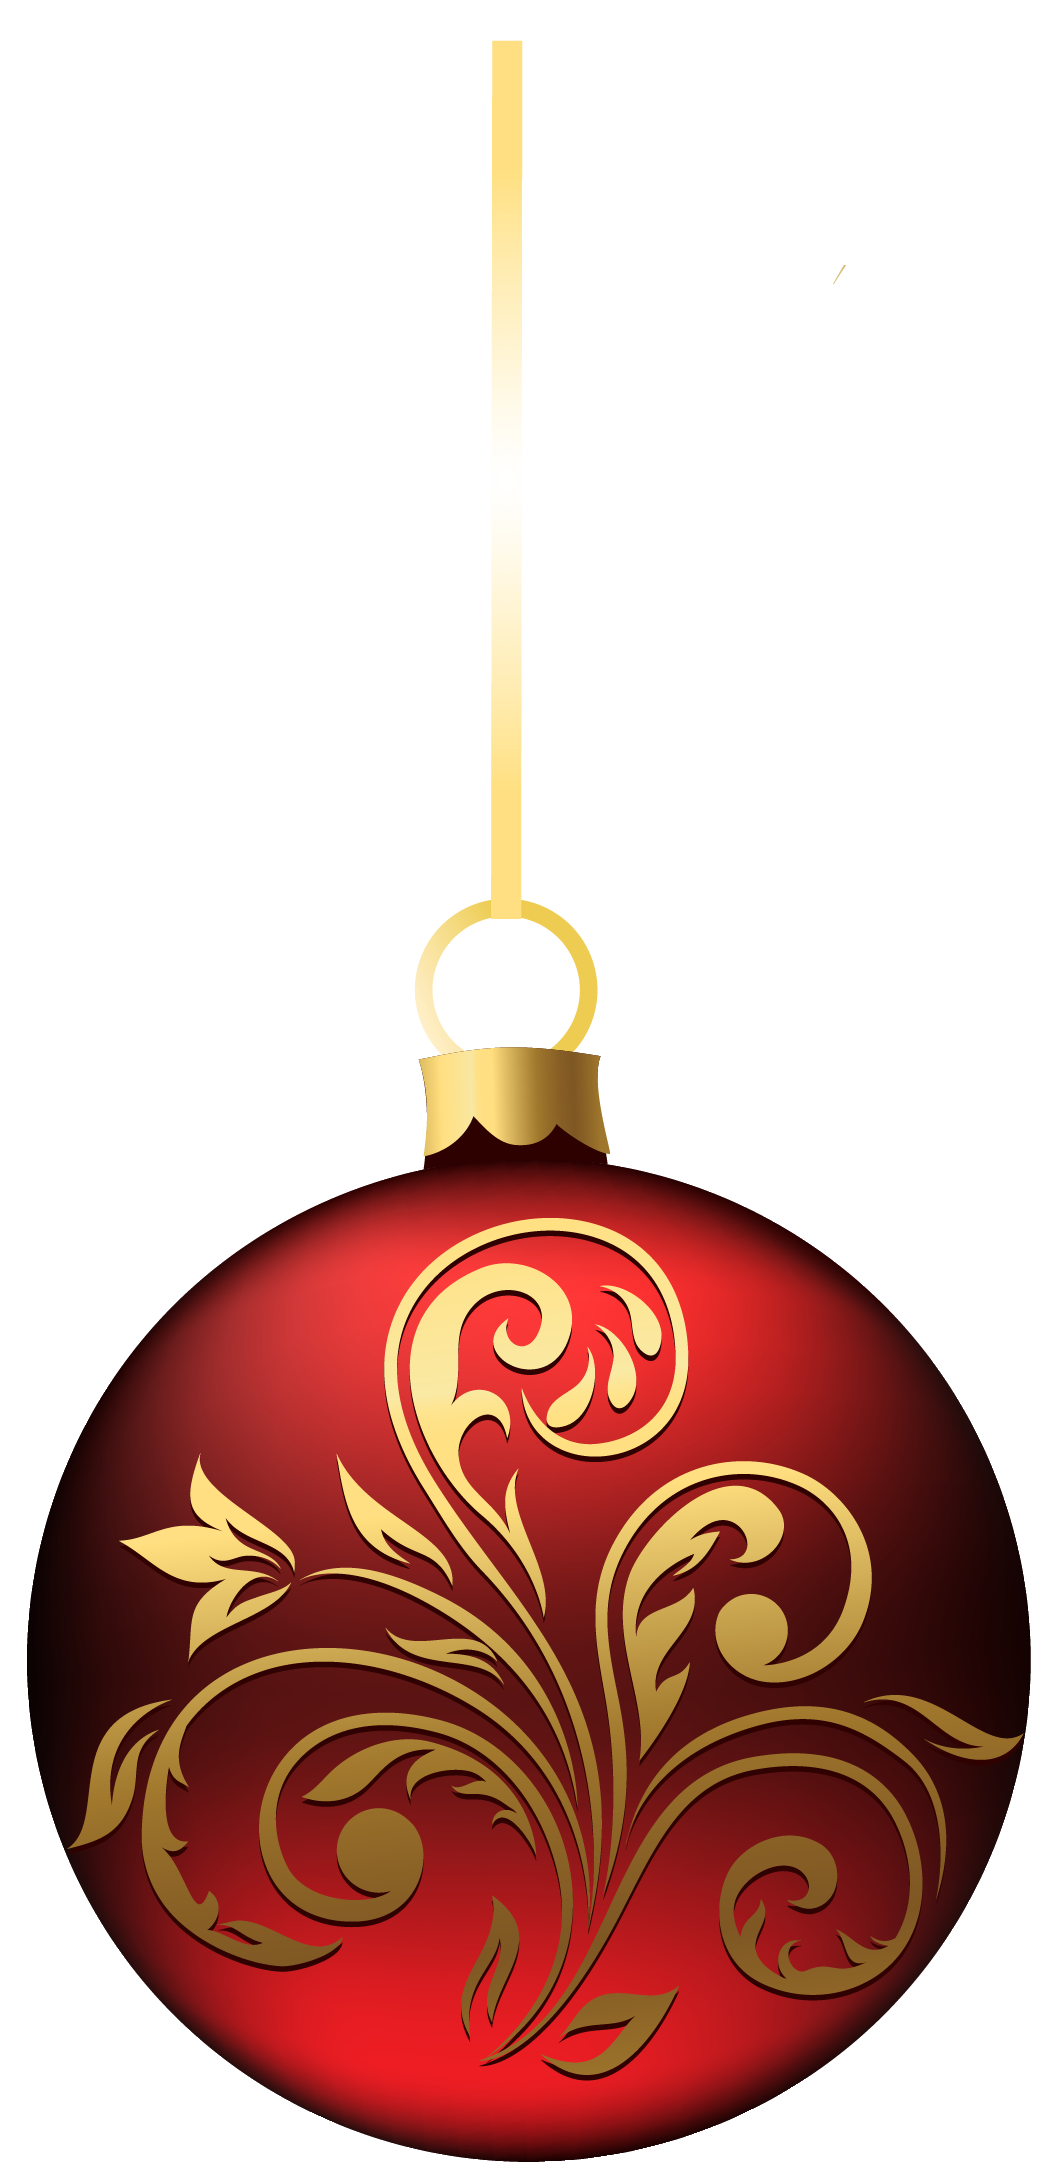 clipart design ultimate ornaments collection - photo #45